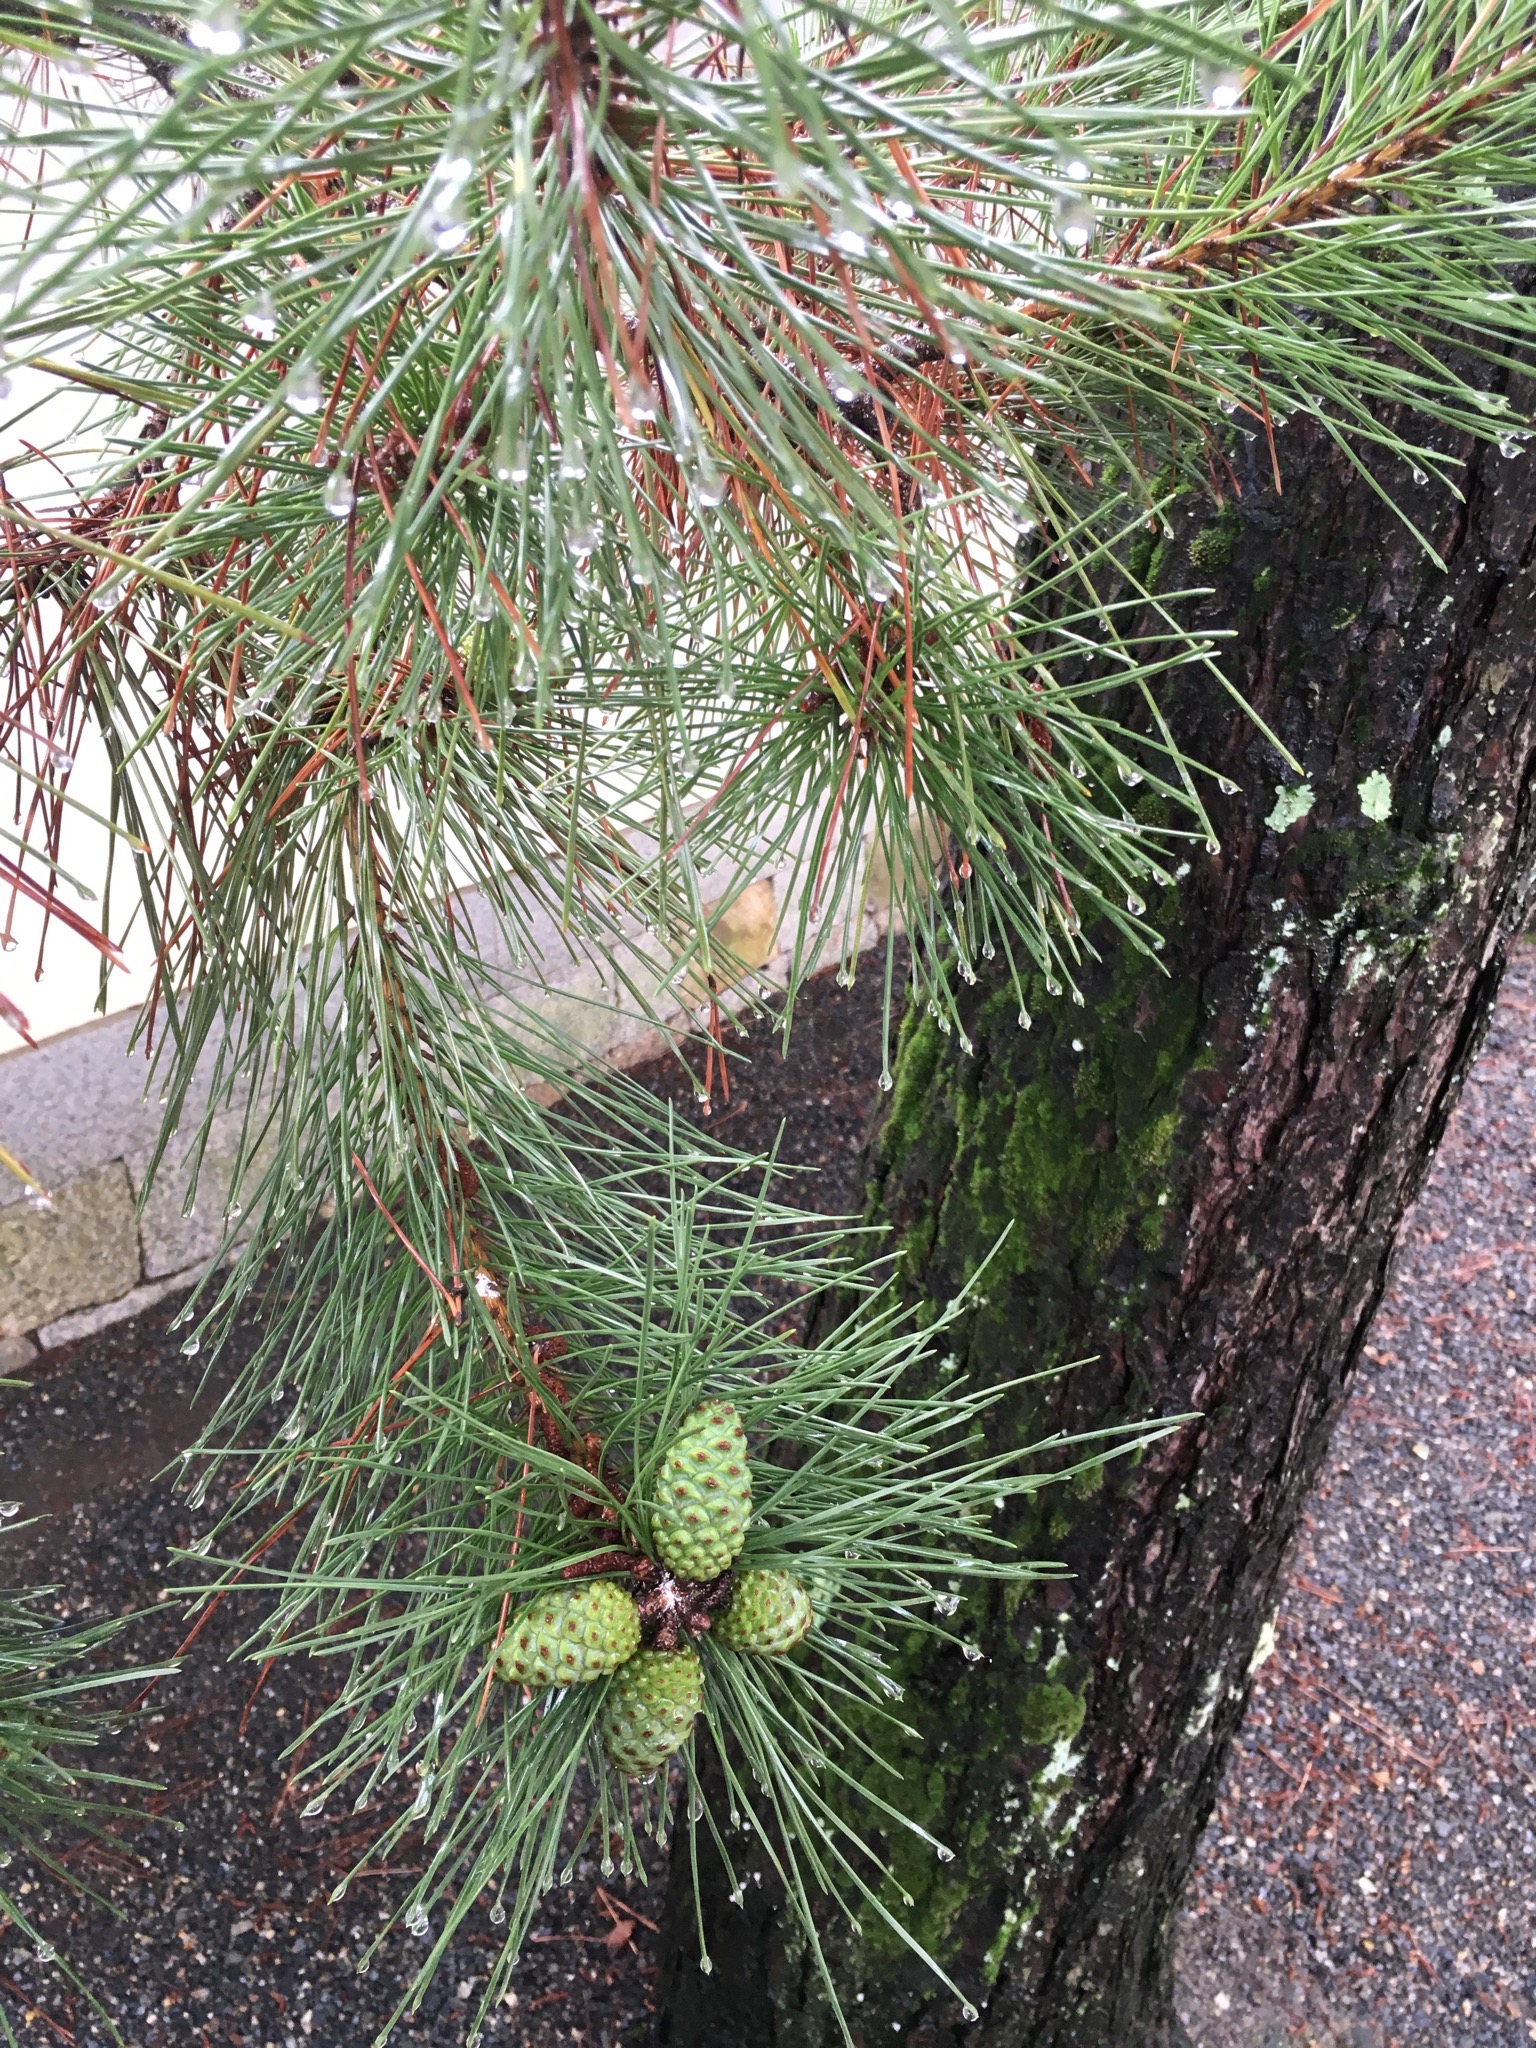 Jewel-like water droplets on the end of pine needles at Myoshin-ji Temple, soon after rain. Also taken on the morning of June 23rd.